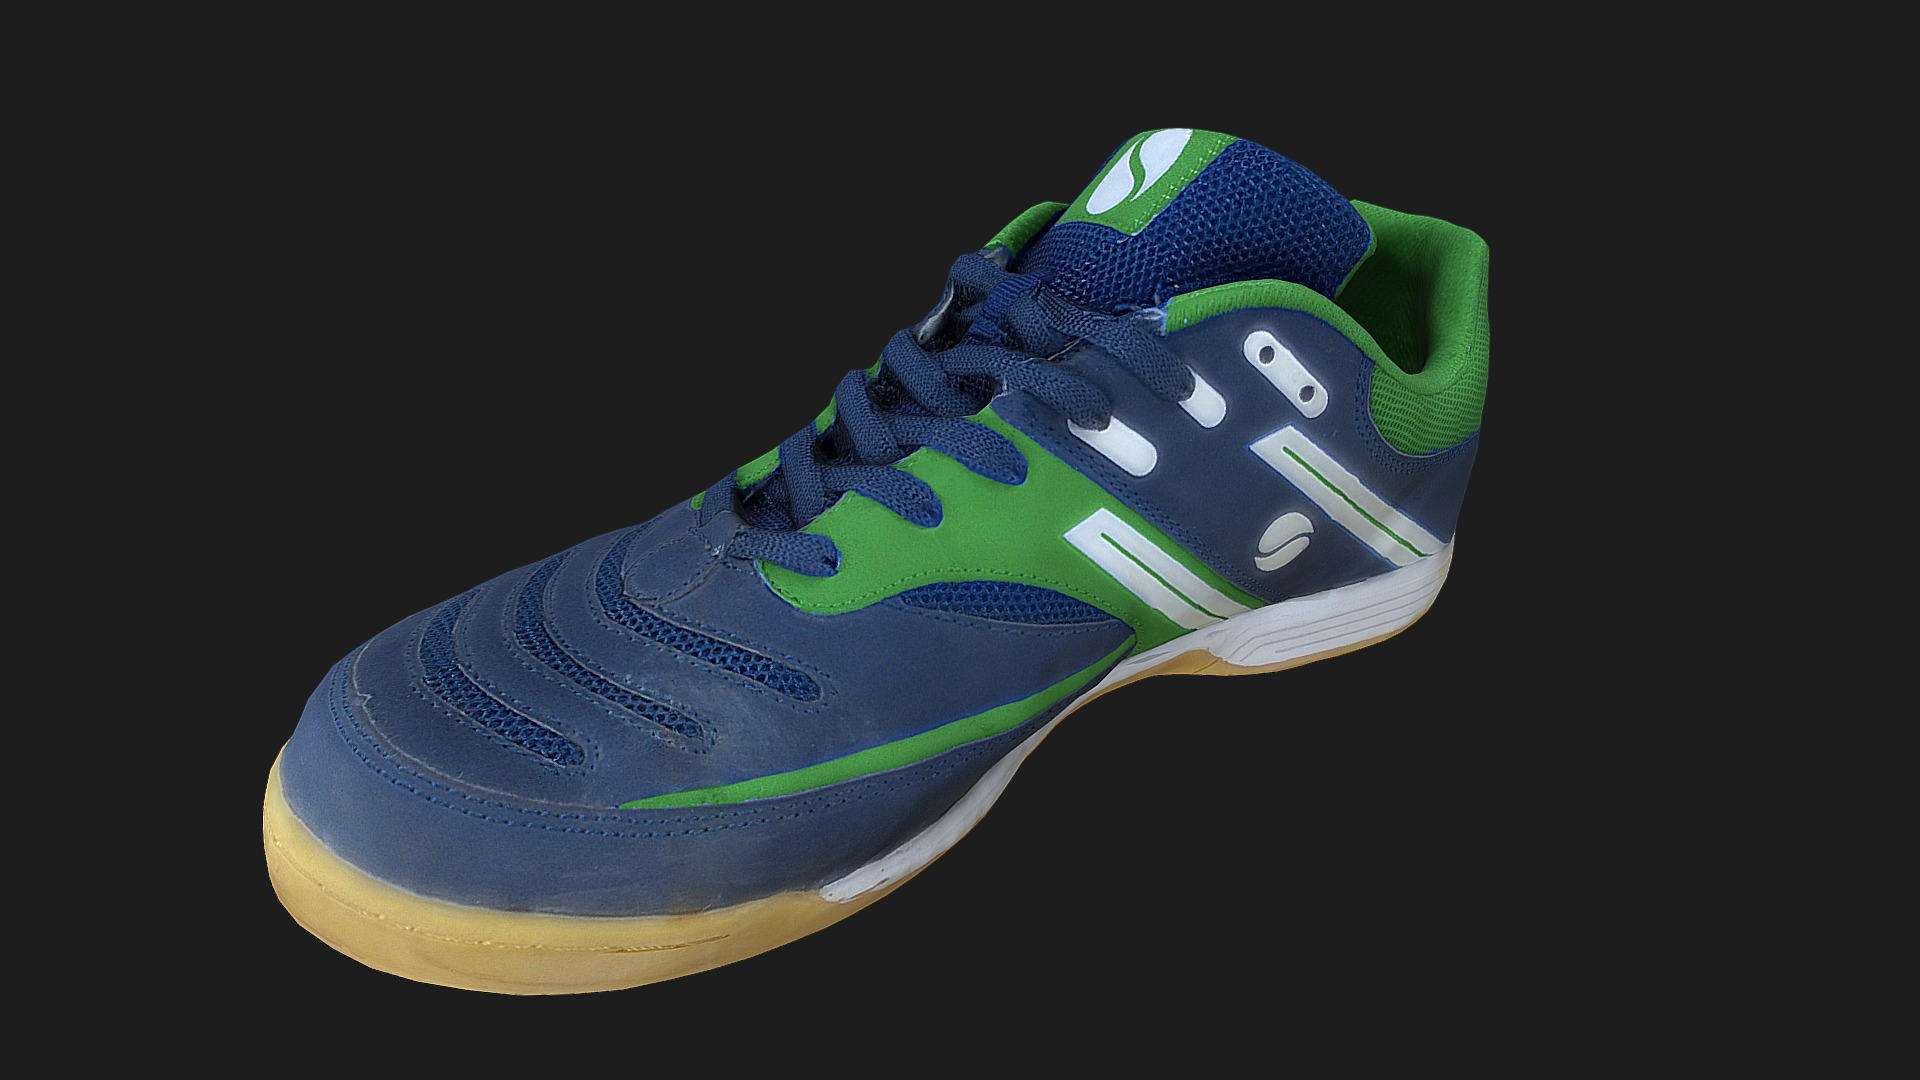 3D model Sport shoe lowpoly - This is a 3D model of the Sport shoe lowpoly. The 3D model is about a pair of blue and green tennis shoes.